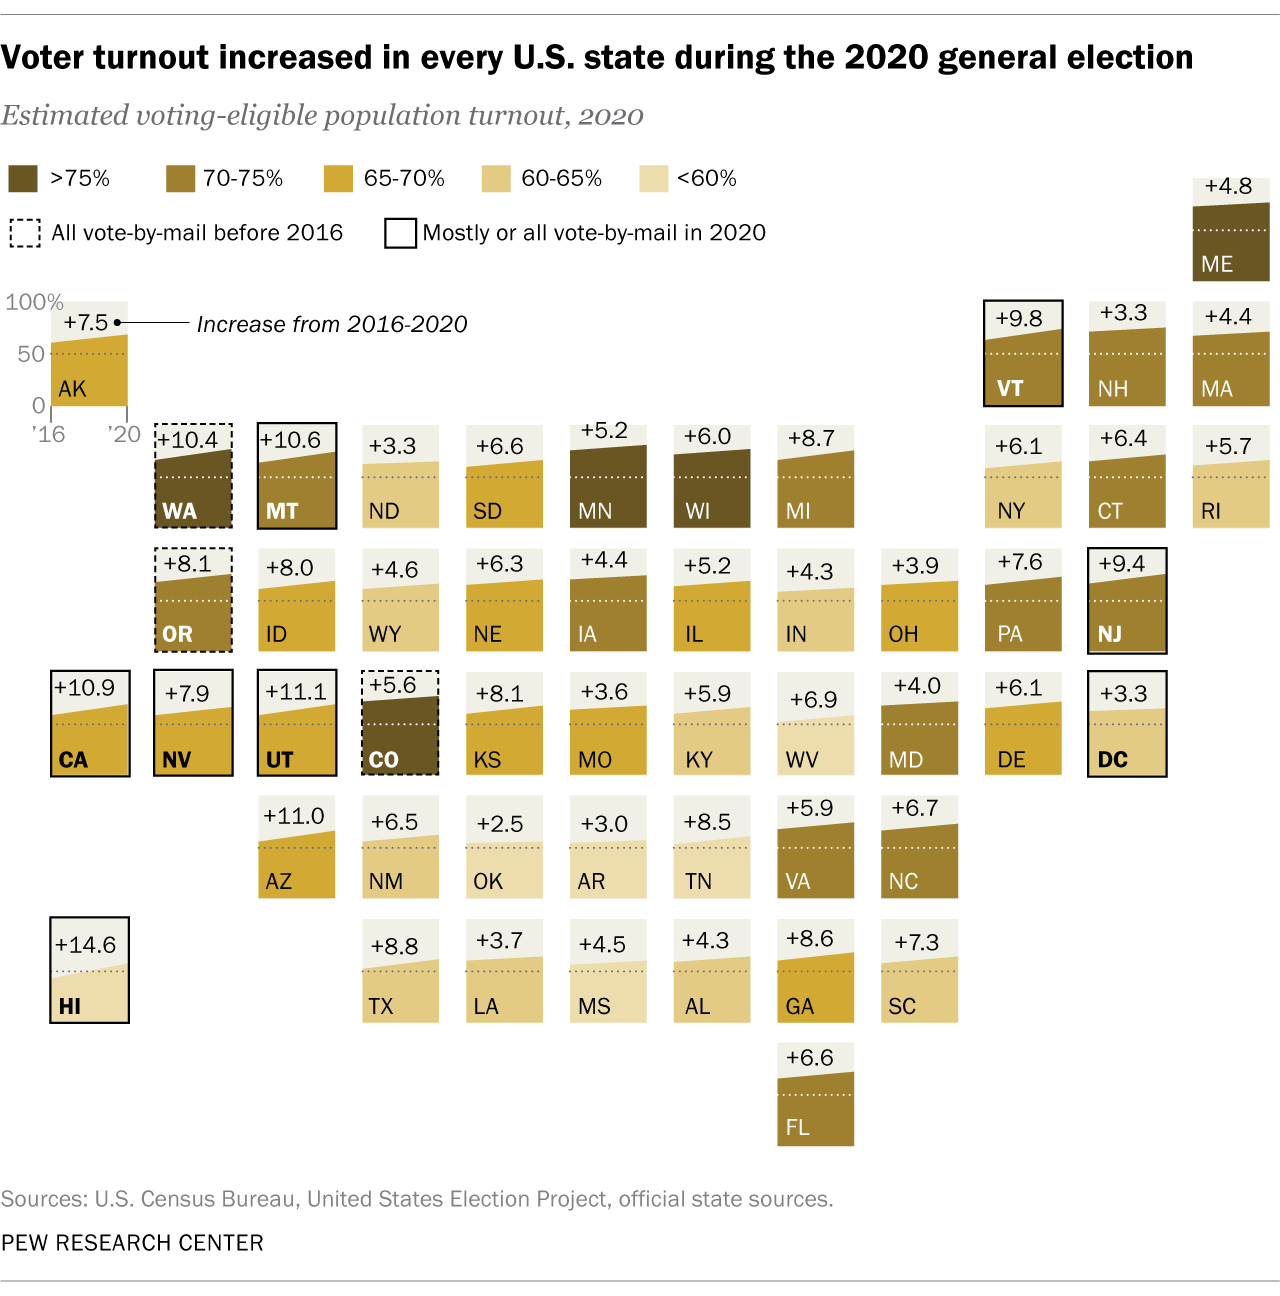 A map showing that voter turnout increased in every U.S. state during the 2020 general election